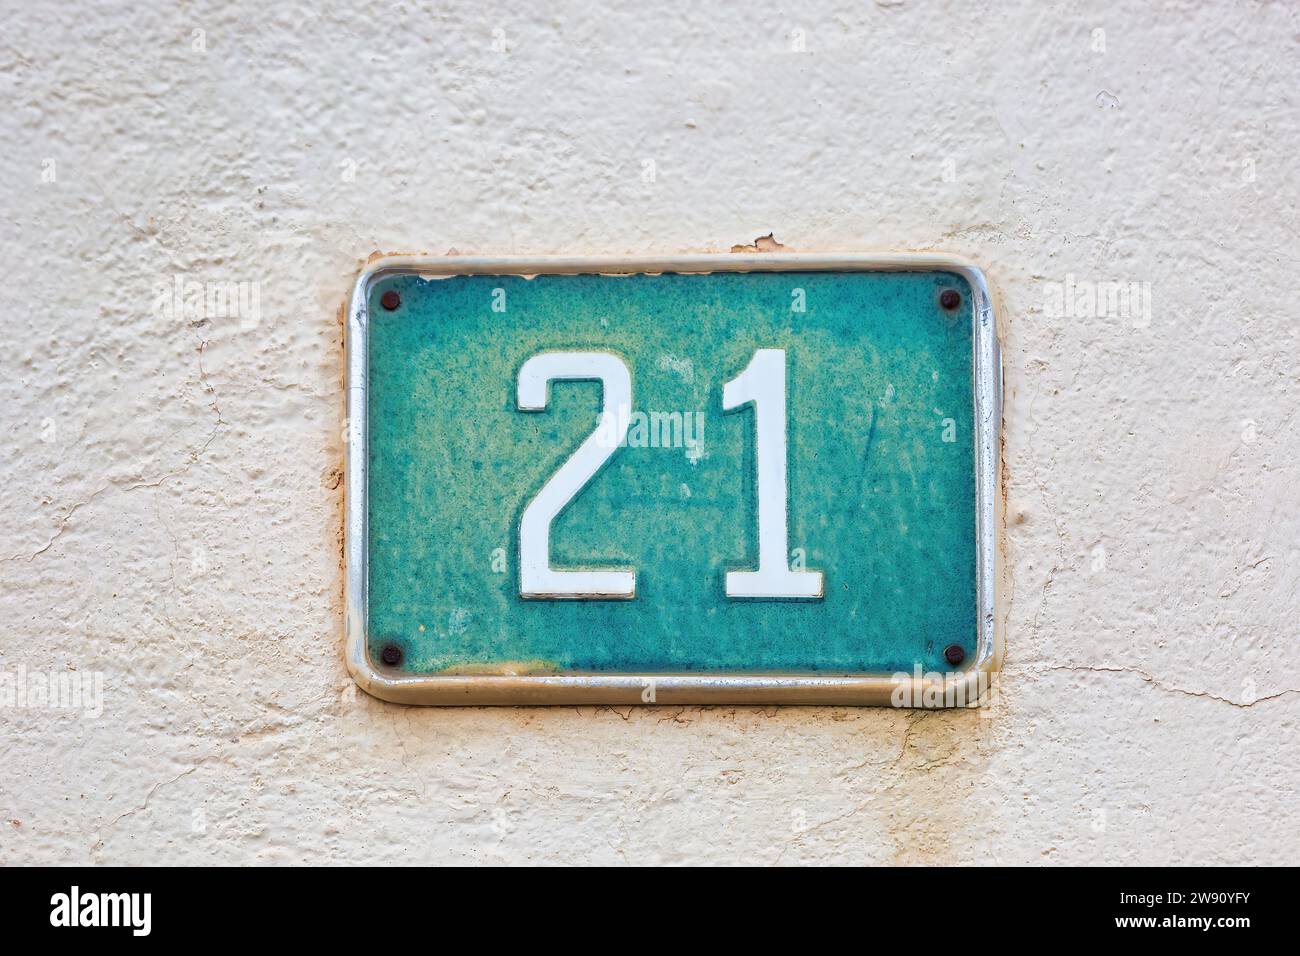 House Number 21 on White Wall: Address Marker for Home Stock Photo